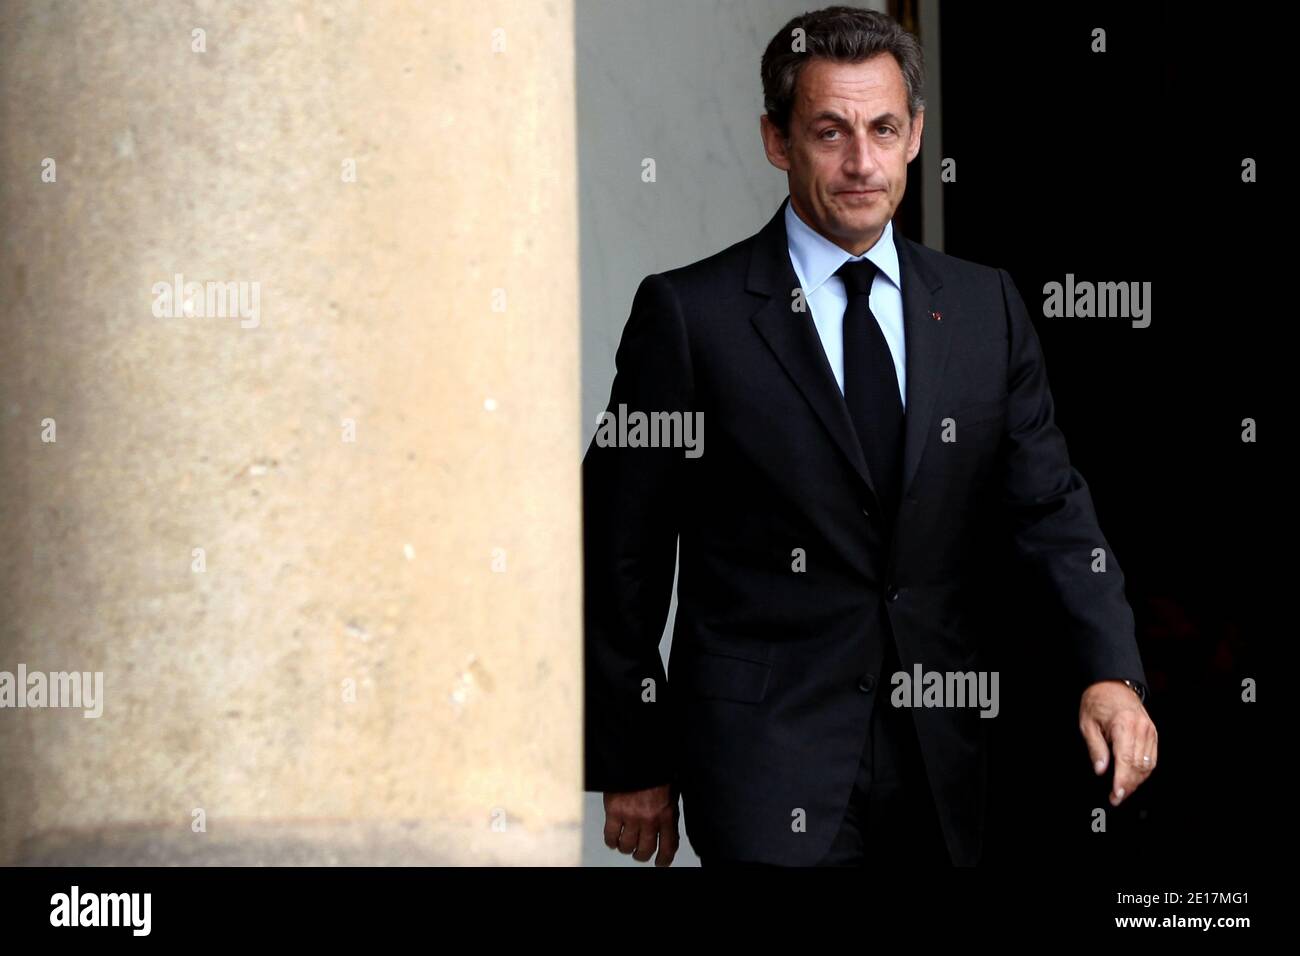 French president Nicolas Sarkozy arrives to welcome European Union president Herman Van Rompuy prior to a working lunch at the Elysee presidential palace in Paris, France on june 15, 2011. Photo by Stephane Lemouton/ABACAPRESS.COM Stock Photo